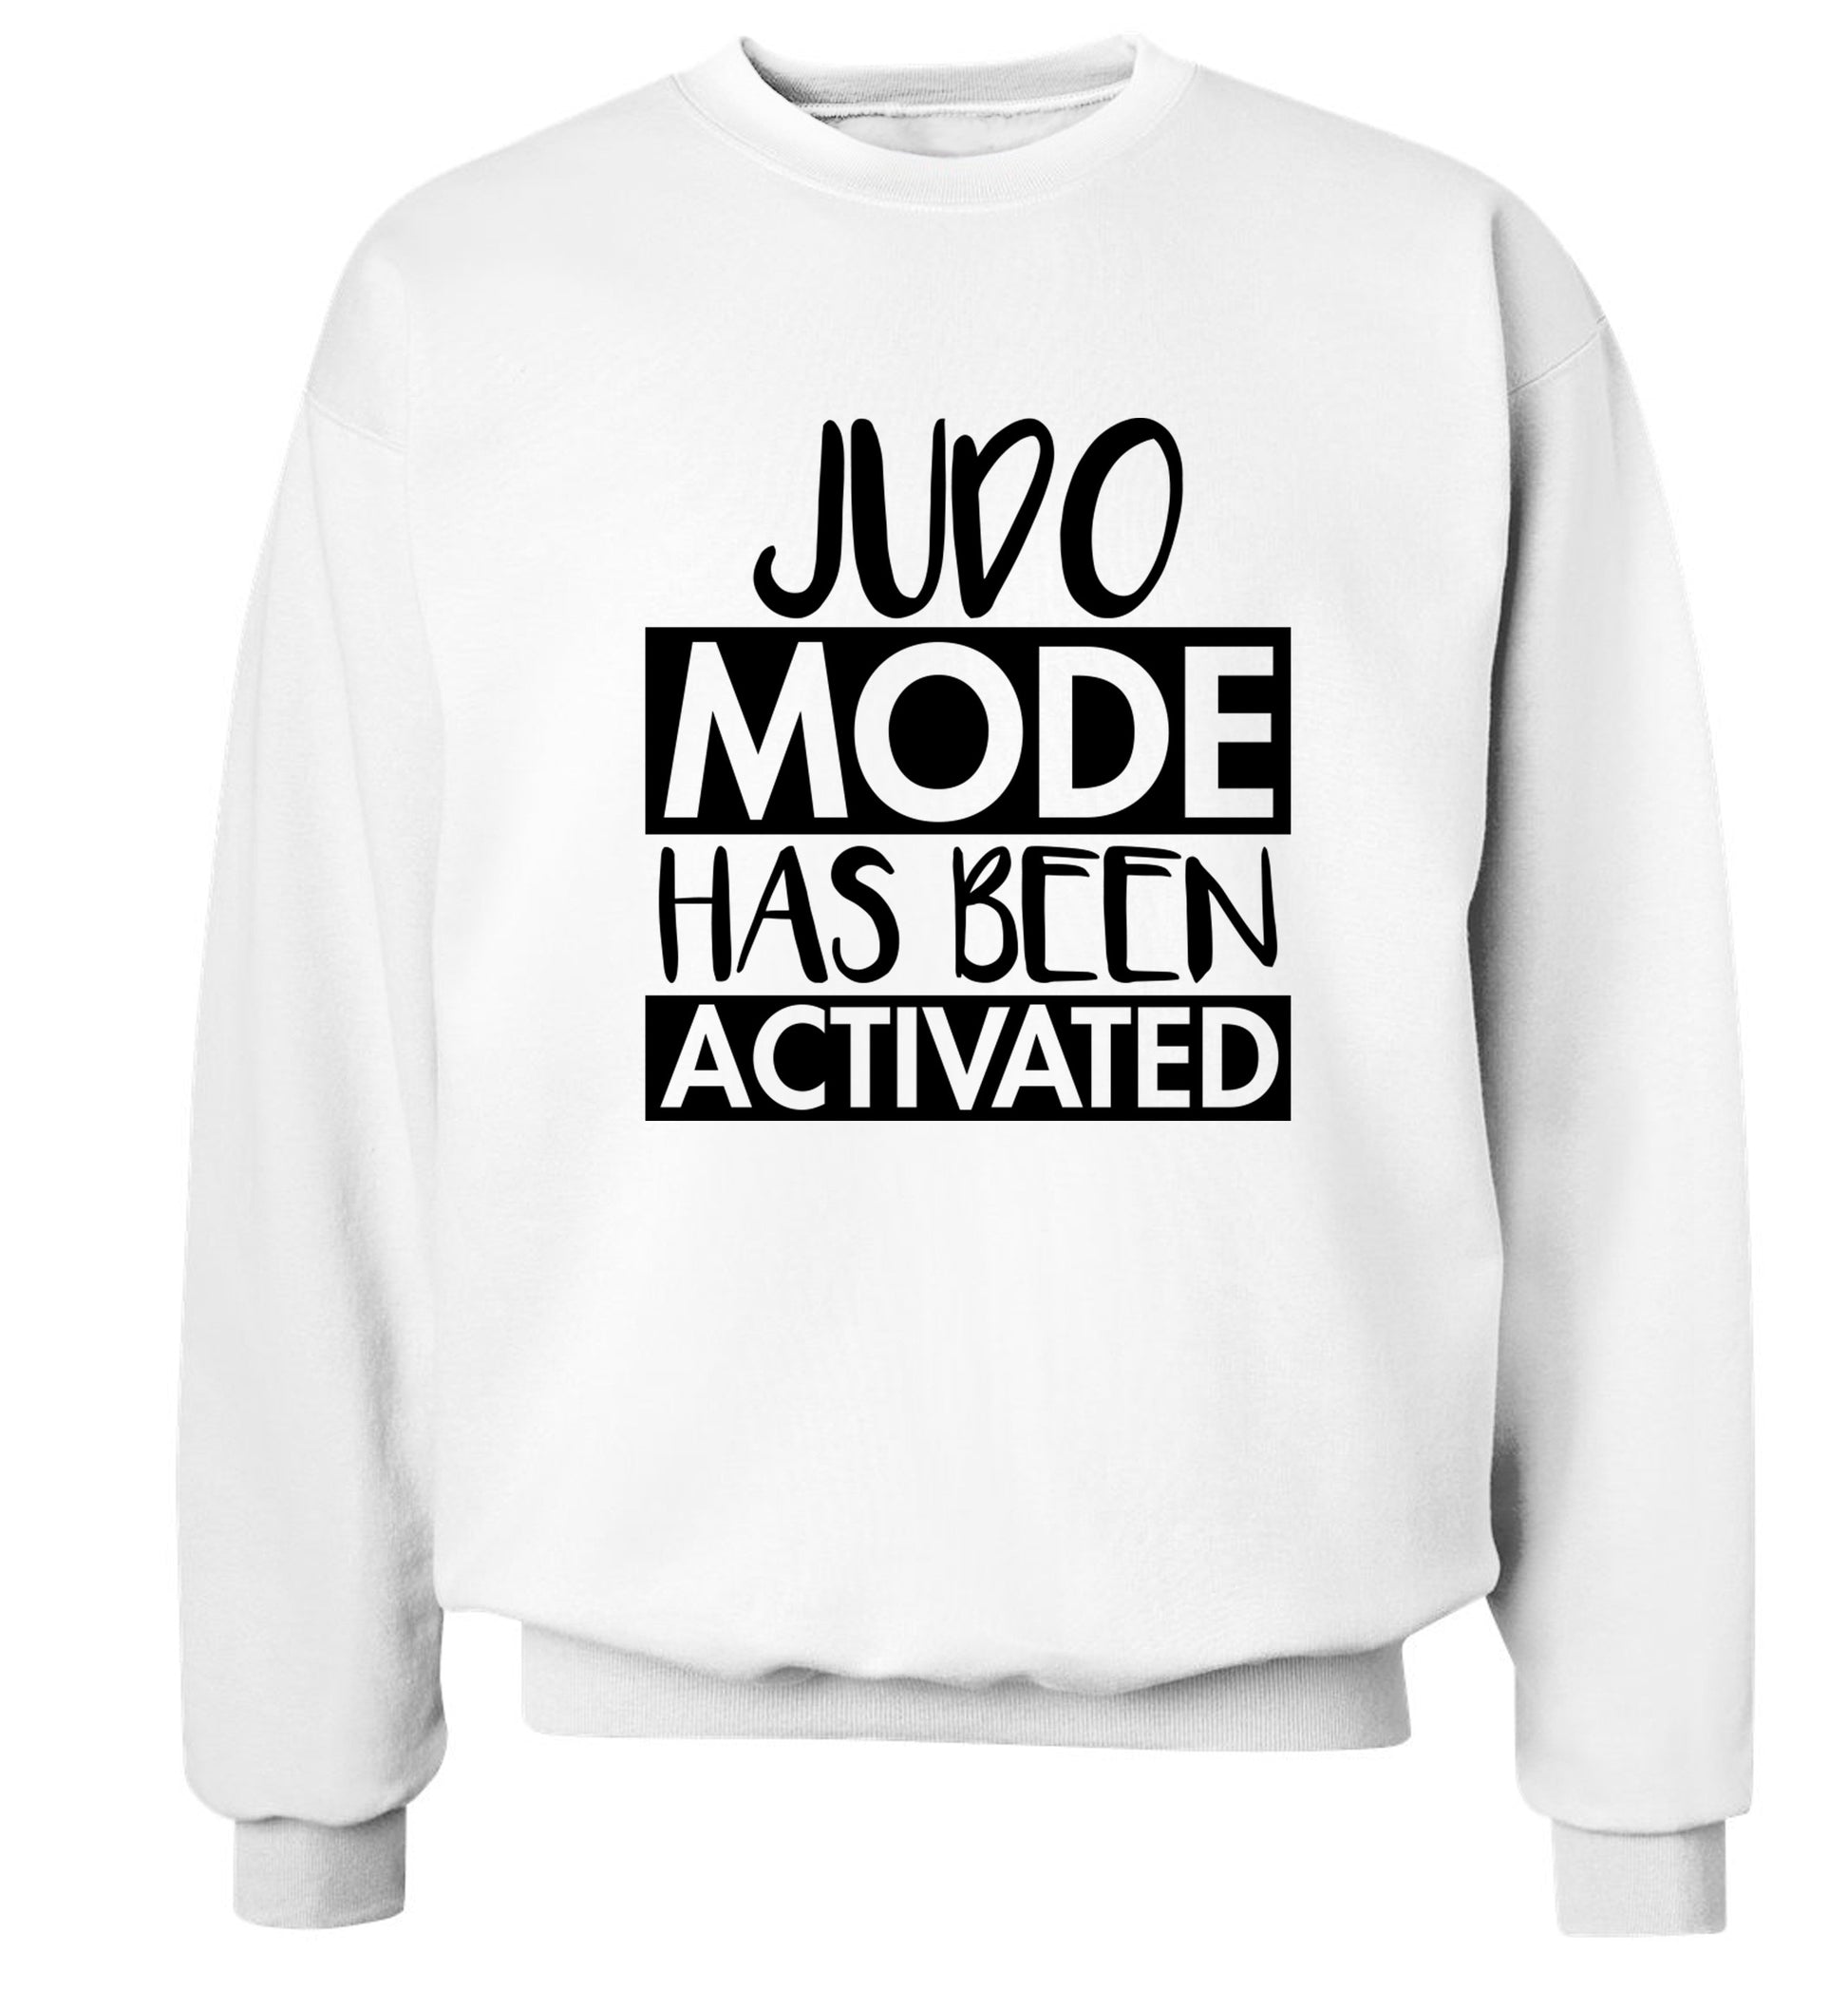 Judo mode activated Adult's unisex white Sweater 2XL